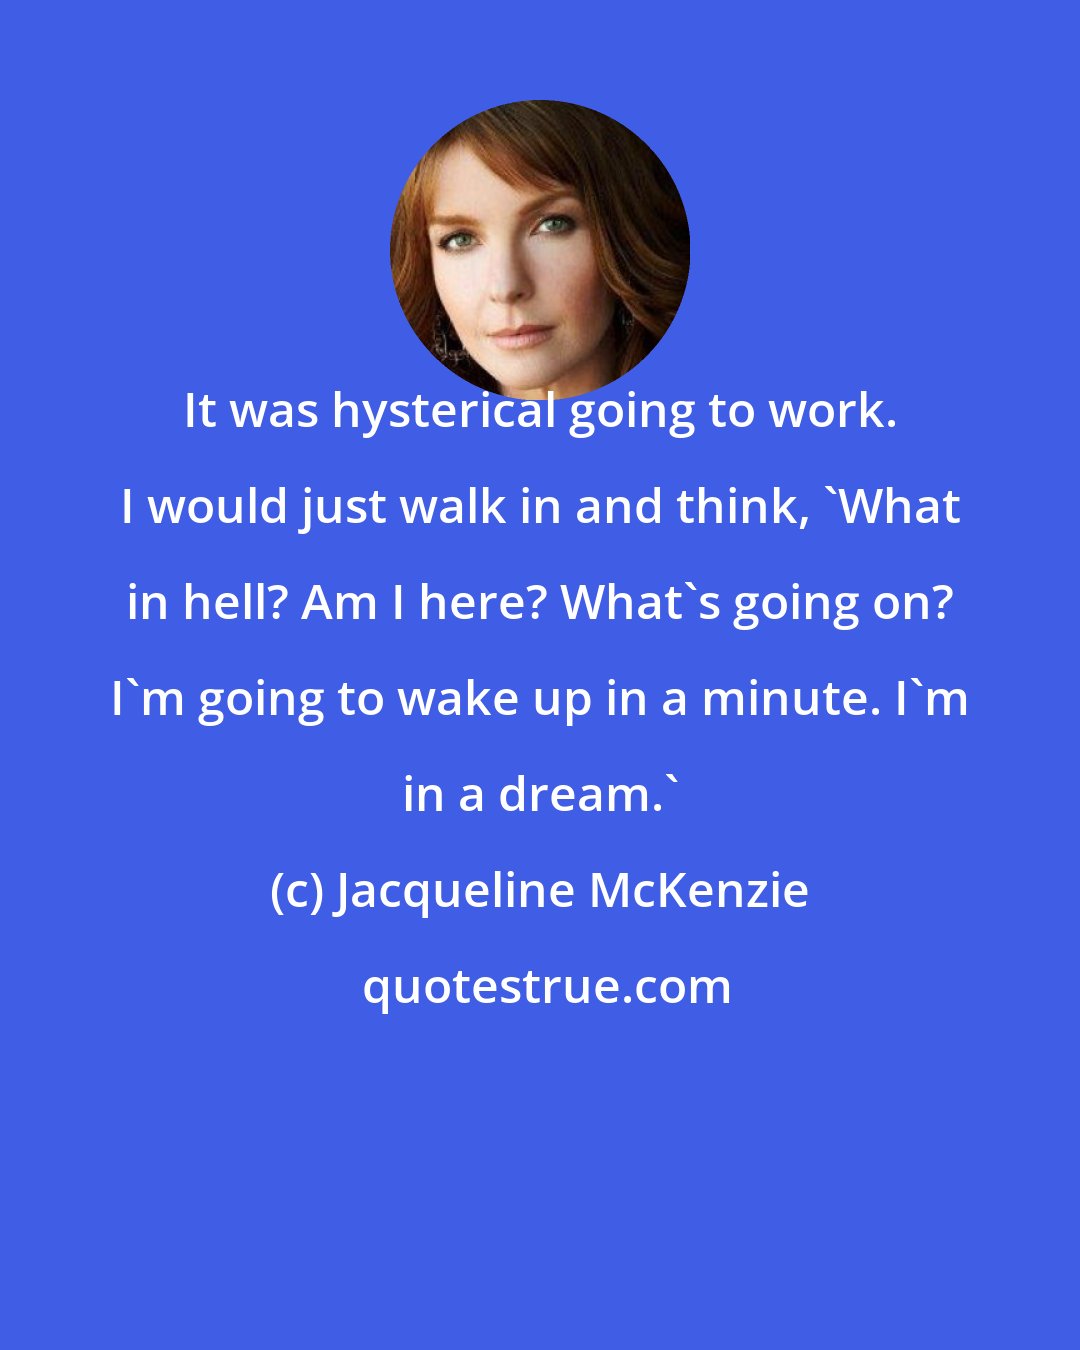 Jacqueline McKenzie: It was hysterical going to work. I would just walk in and think, 'What in hell? Am I here? What's going on? I'm going to wake up in a minute. I'm in a dream.'